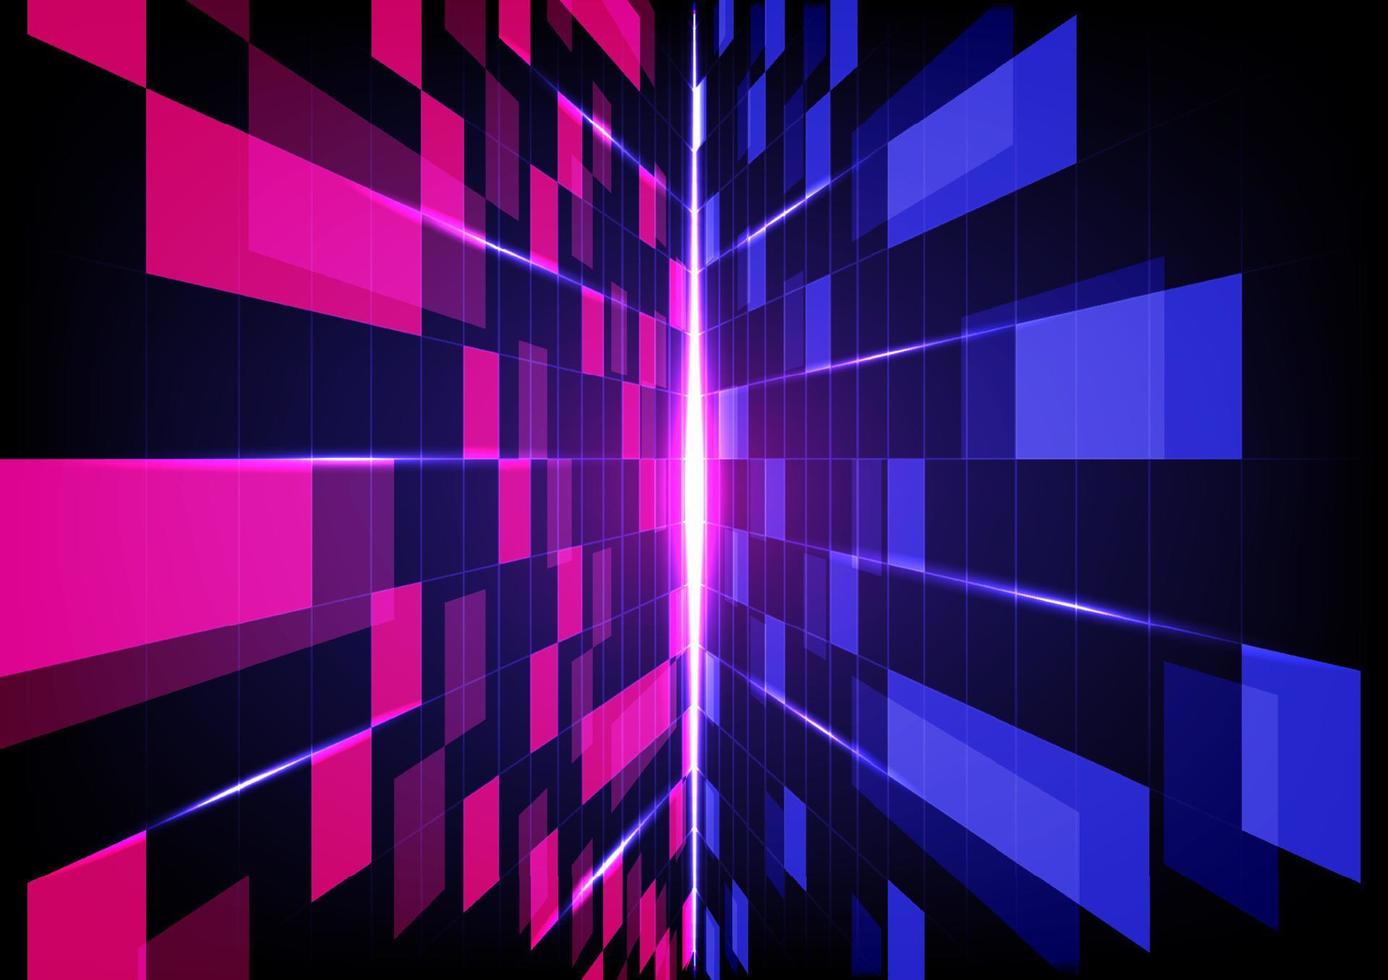 Abstract background technology digital wall perspective with overlapping blue and pink grids and squares. There is a beam of light in the center on a black and blue gradient background. vector